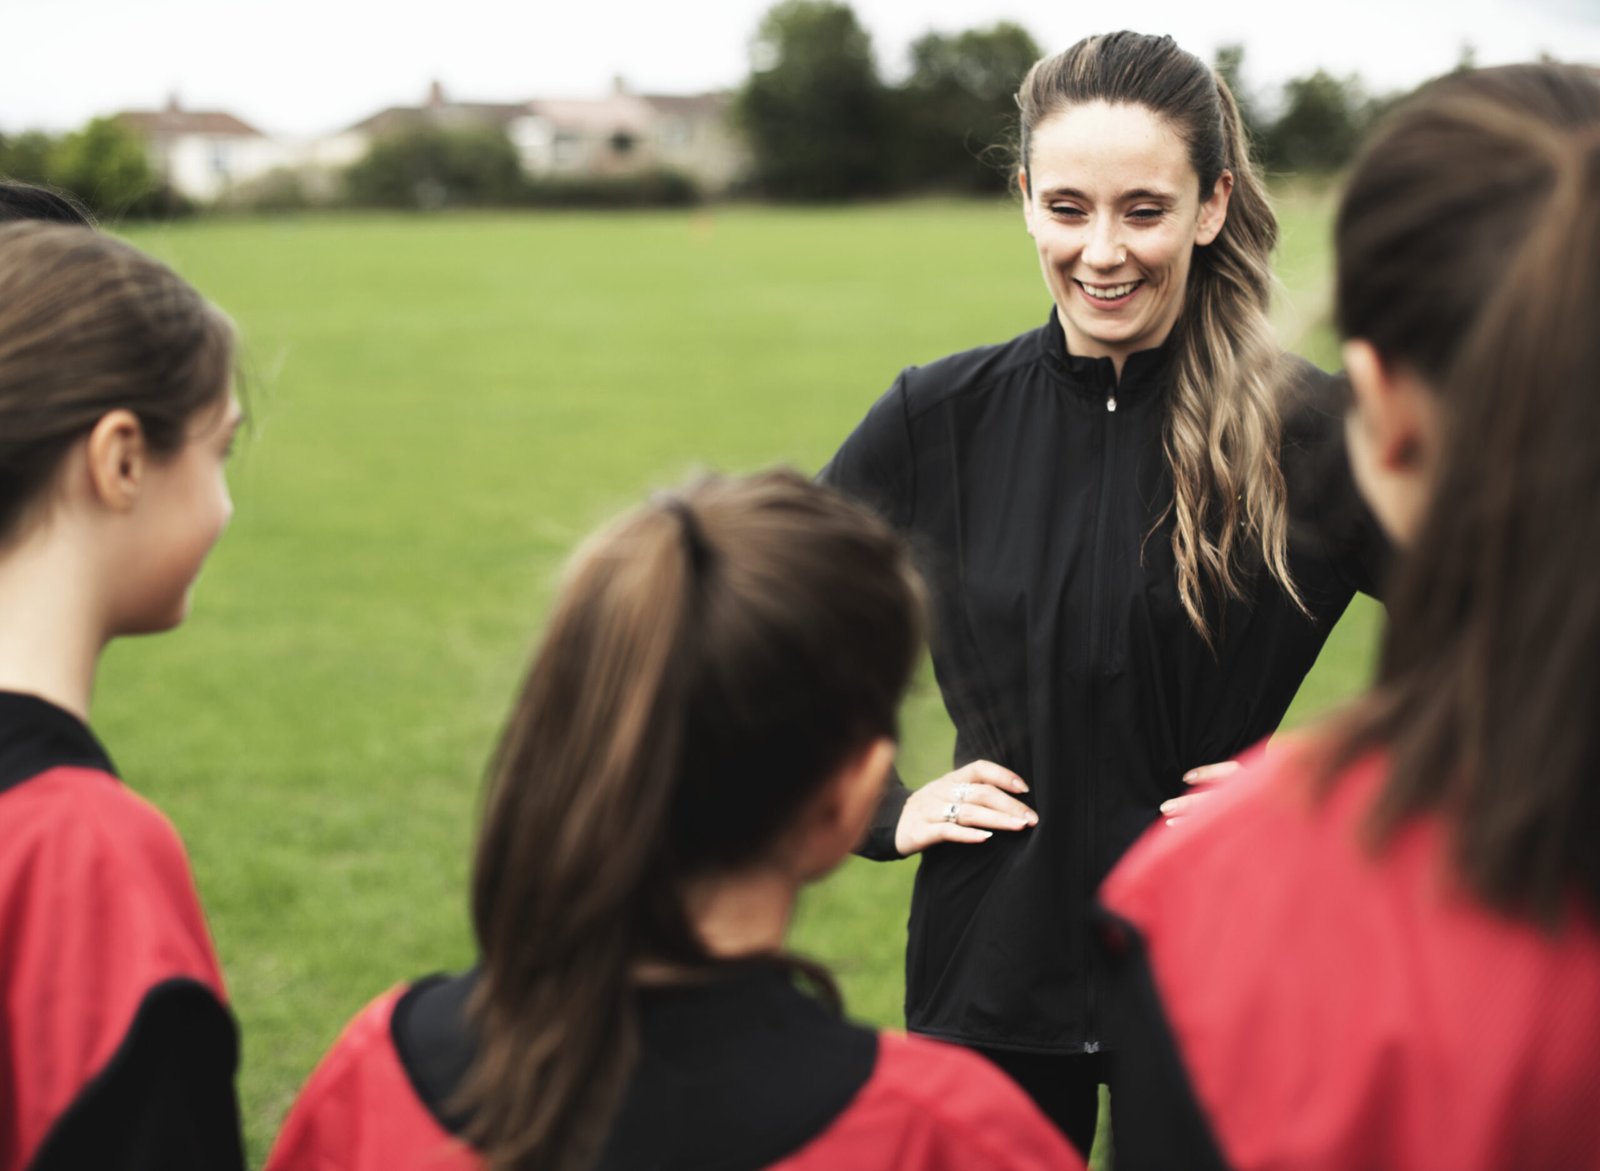 Sports urged to ‘Promote, Collaborate, Include and Reflect’, and boost mental health